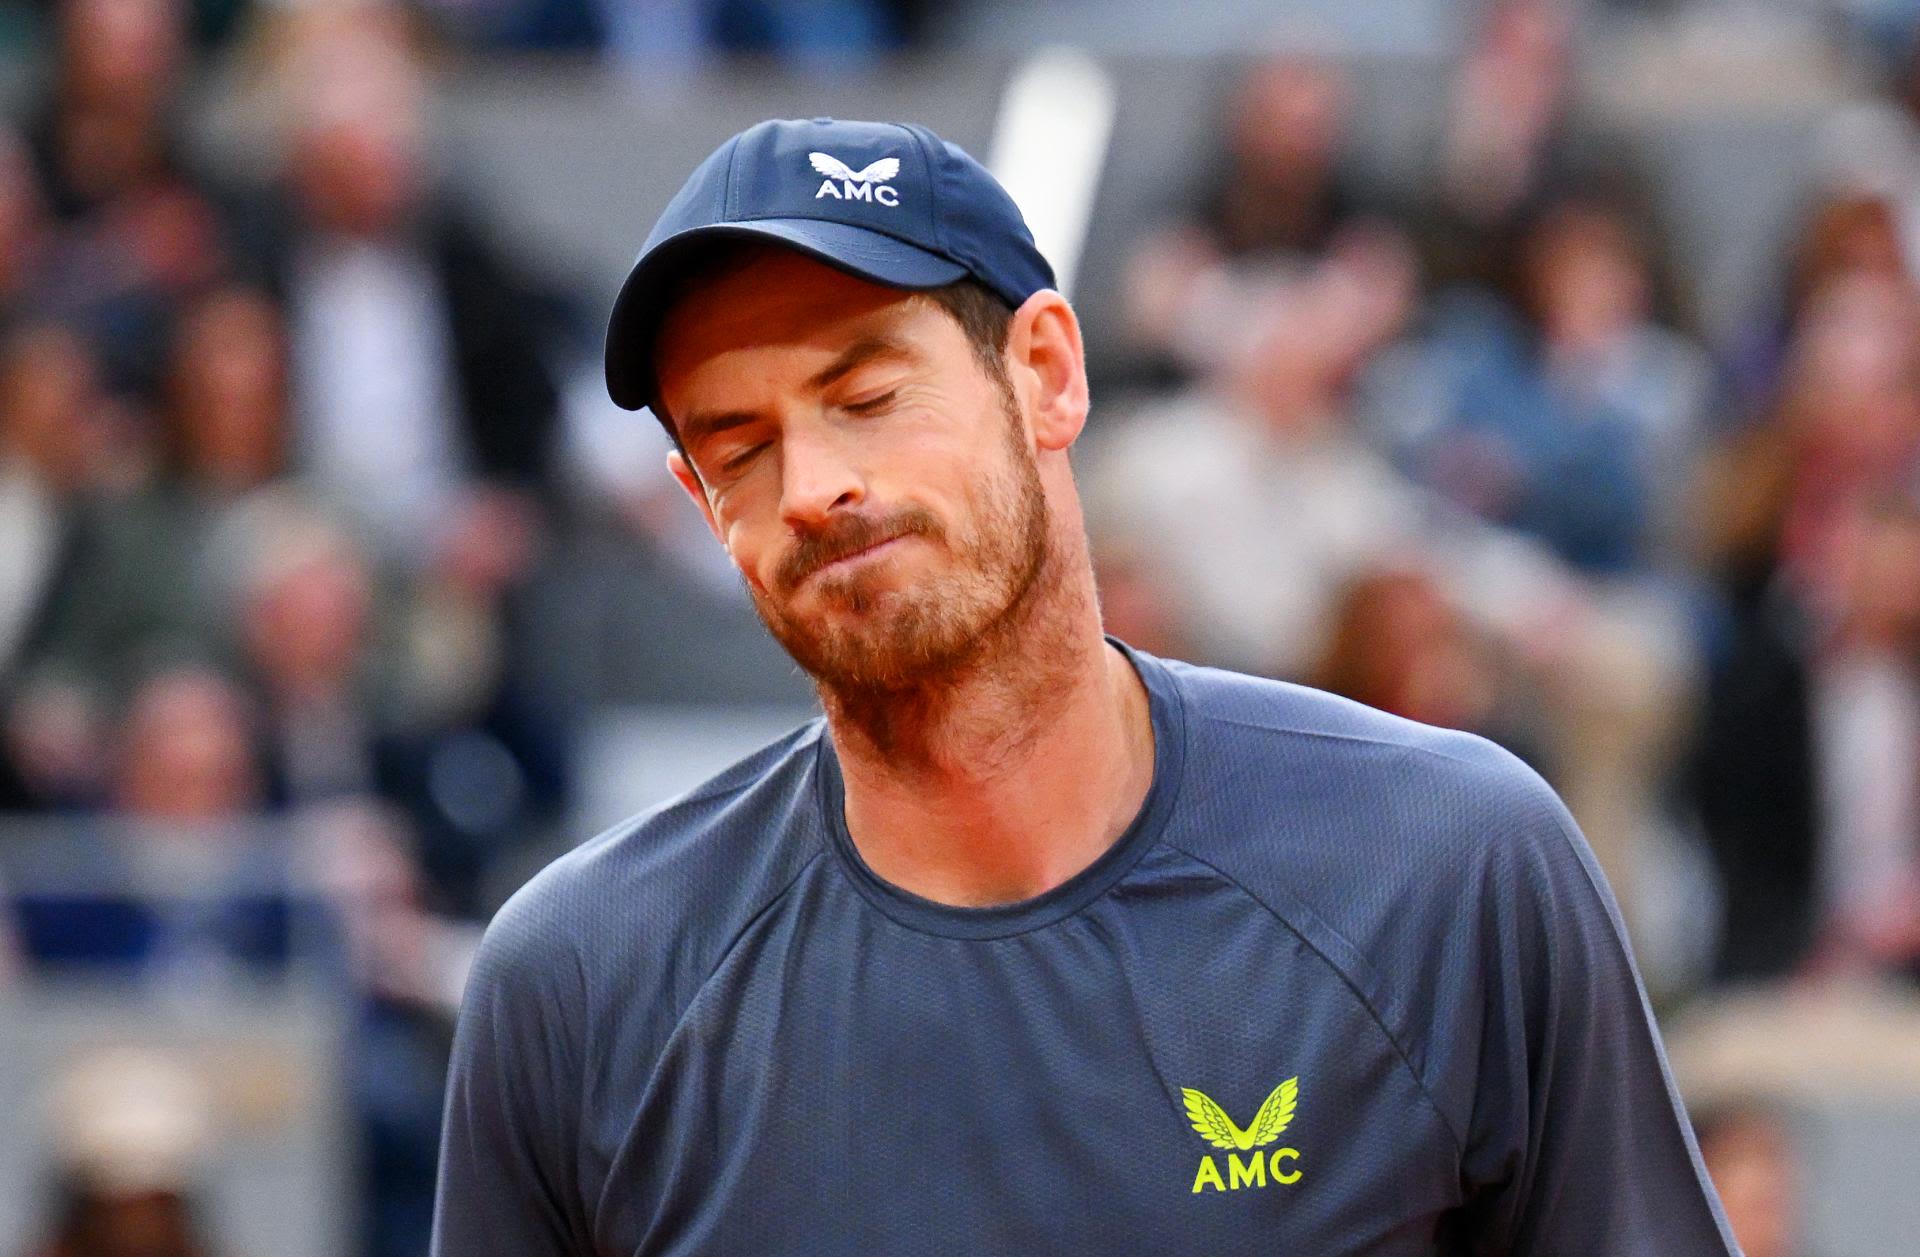 Andy Murray says farewell to Roland Garros after losing to Stan Wawrinka